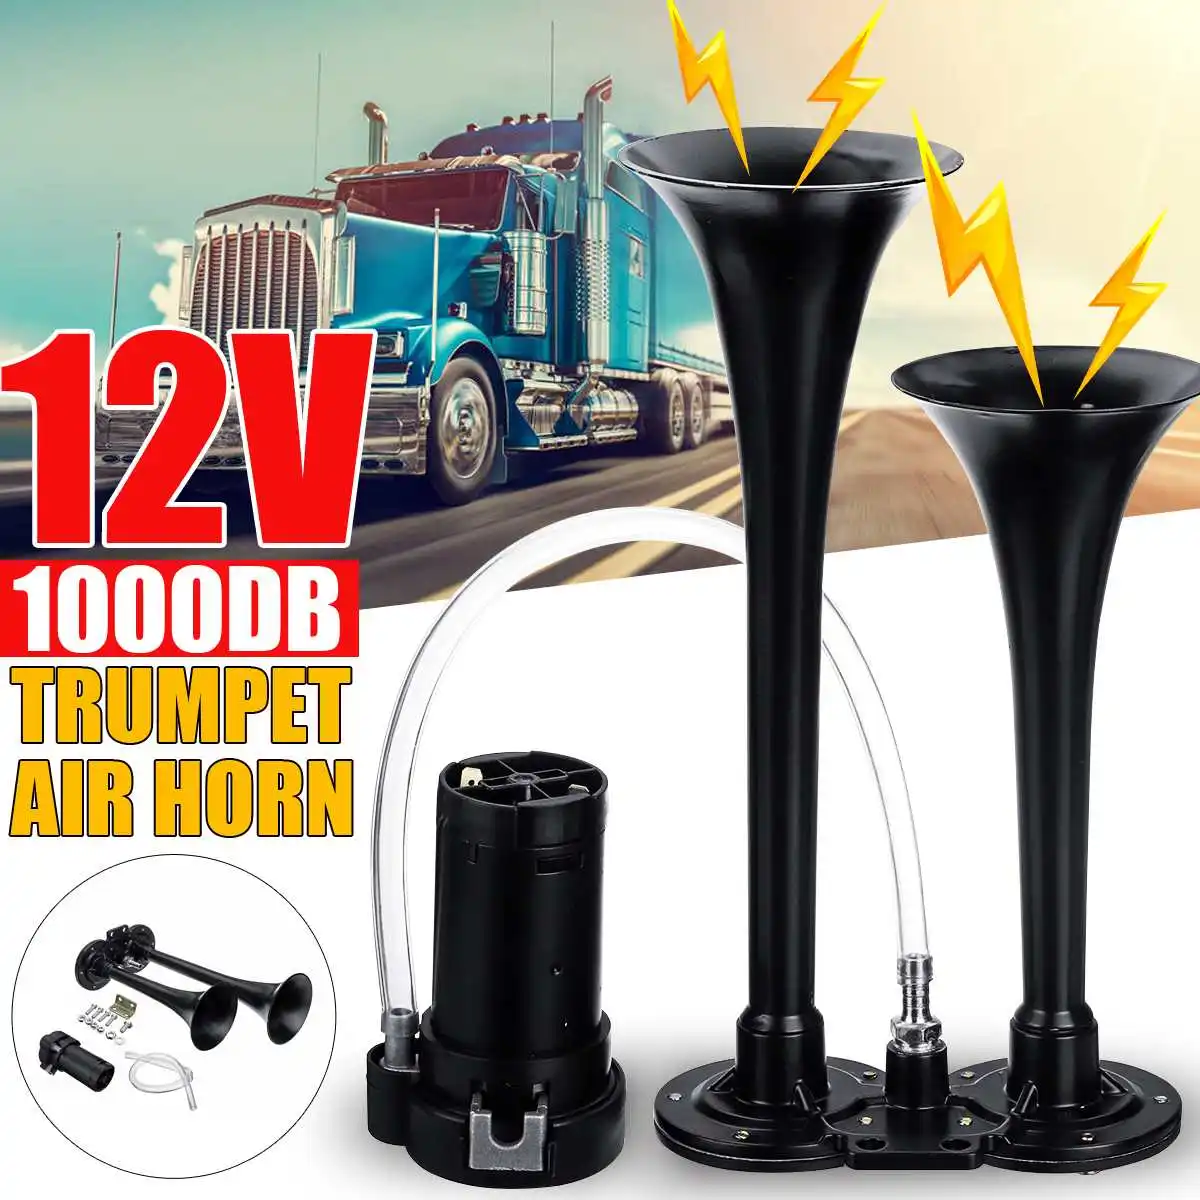 1000DB Super Train Horn For Trucks SUV Car Boat Motorcycles Top High Quality 